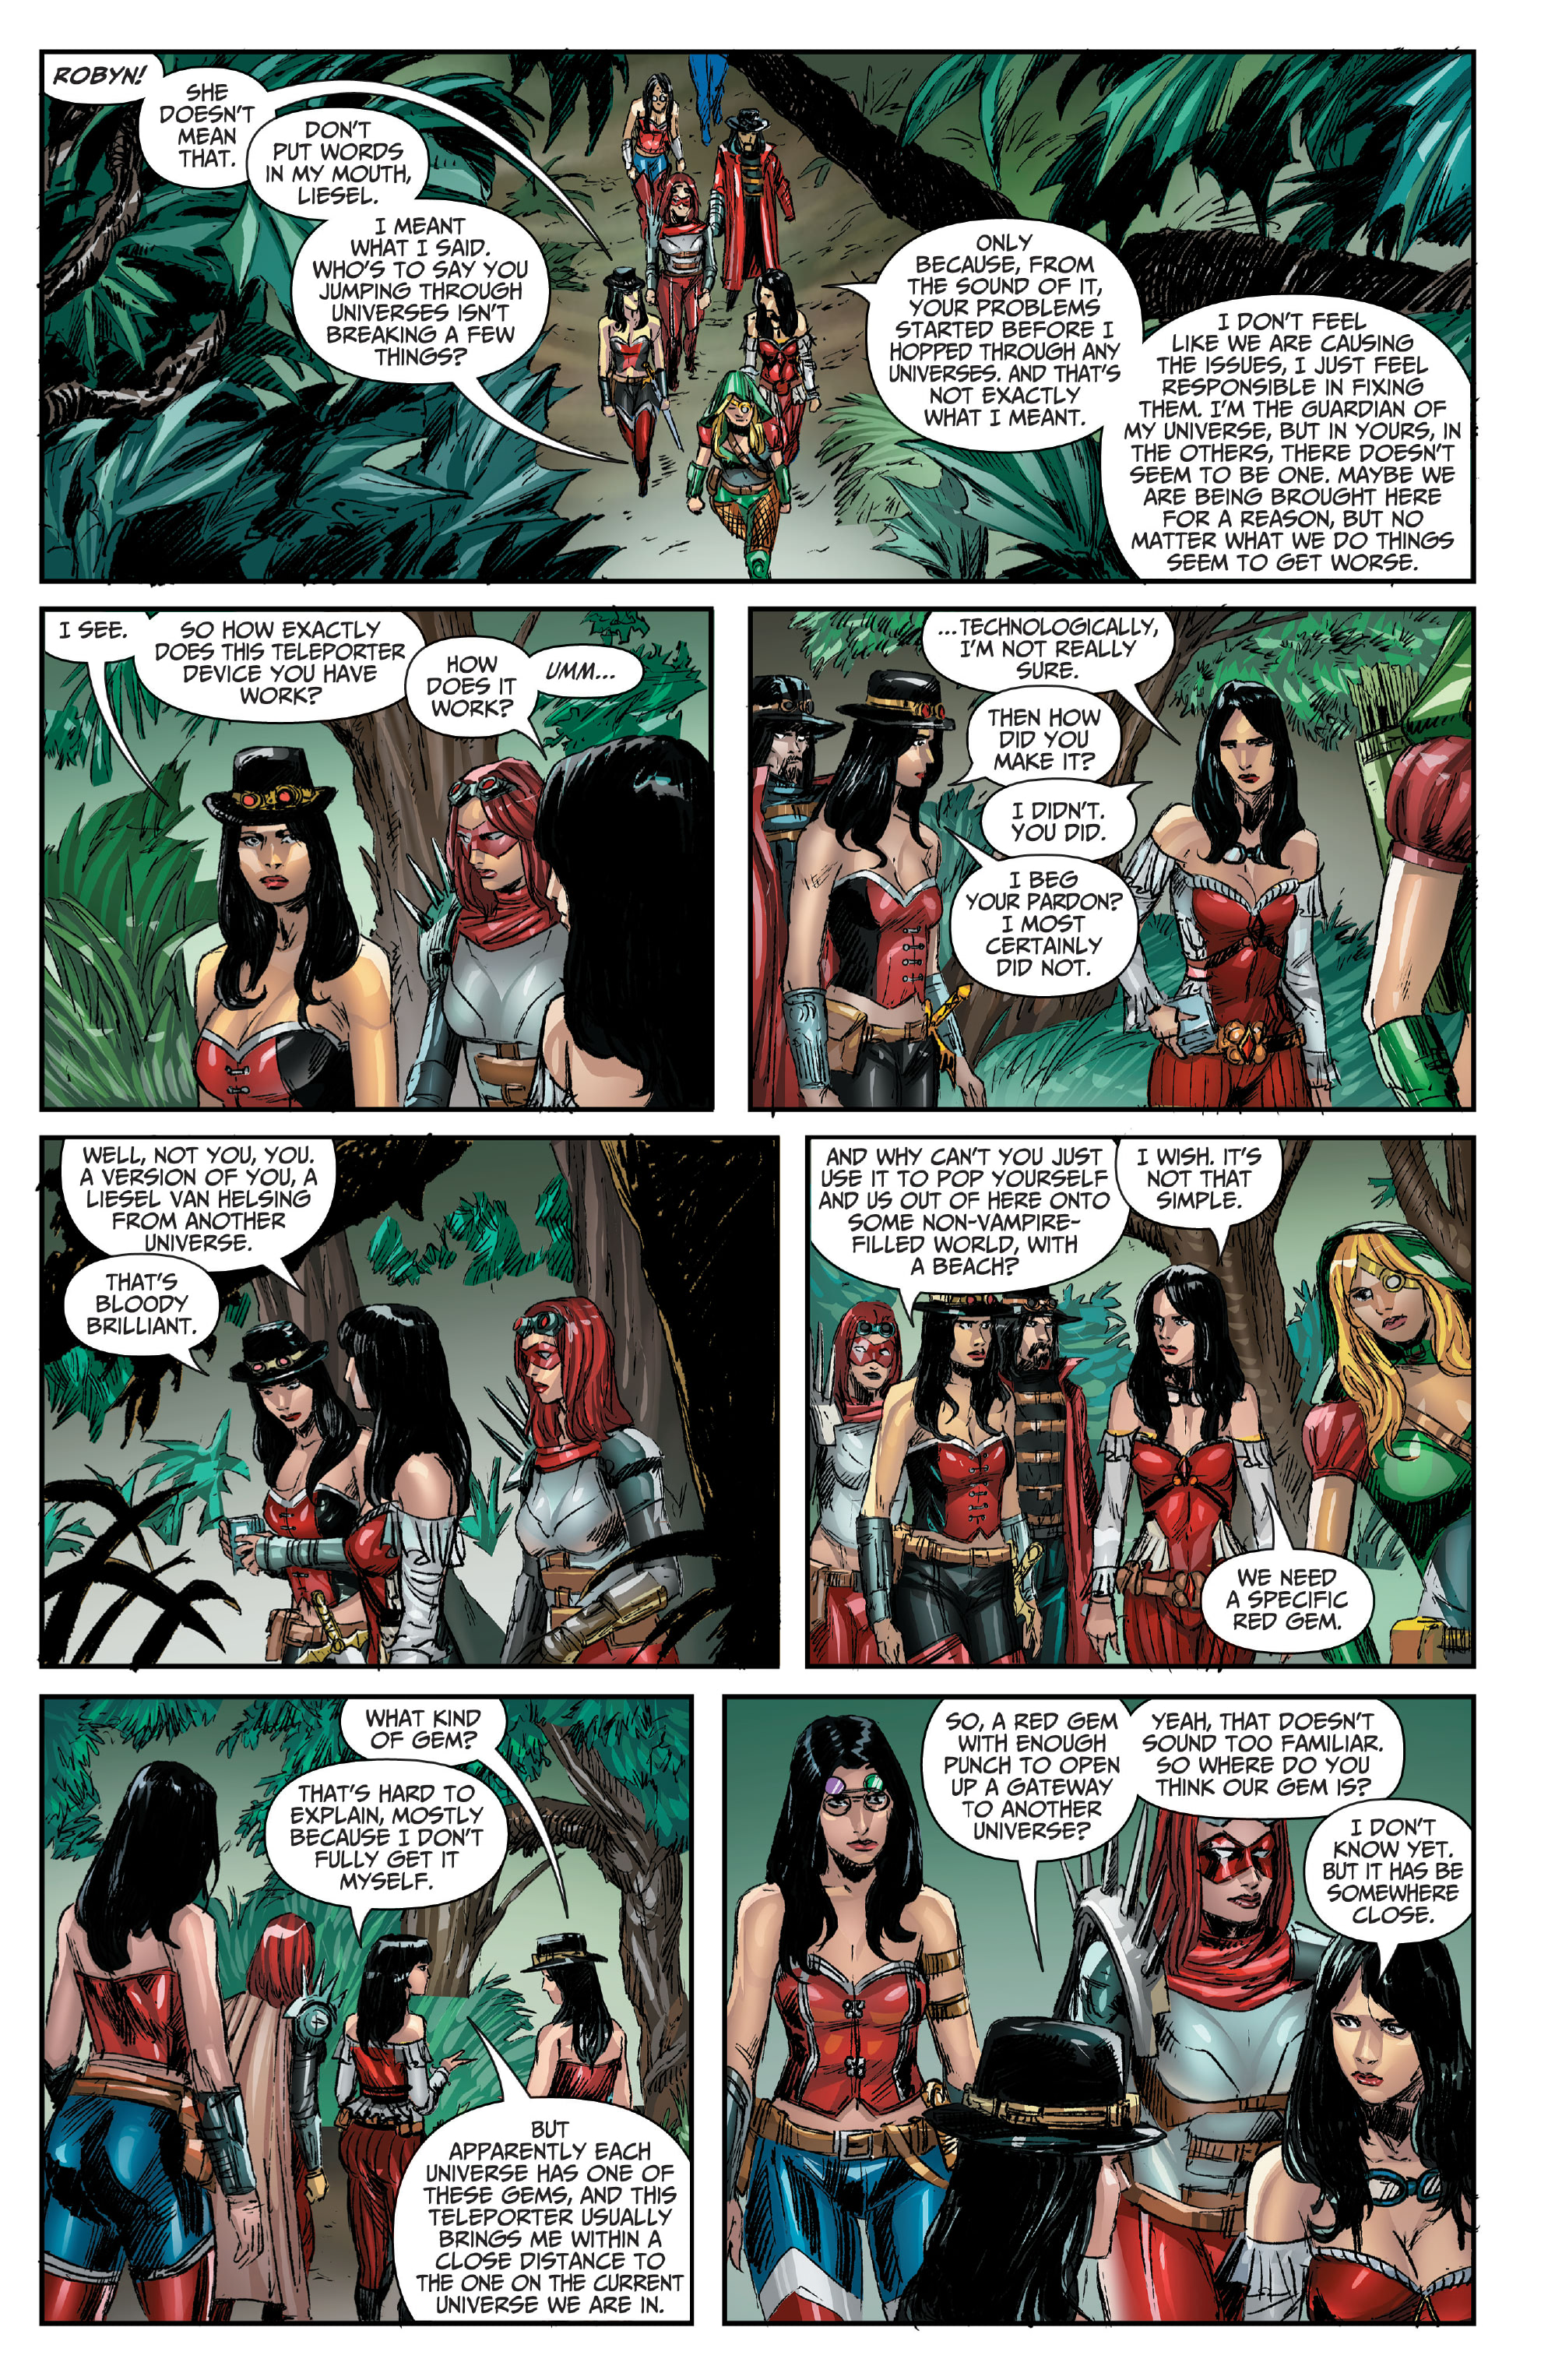 Grimm Fairy Tales (2016-): Chapter 60 - Page 4